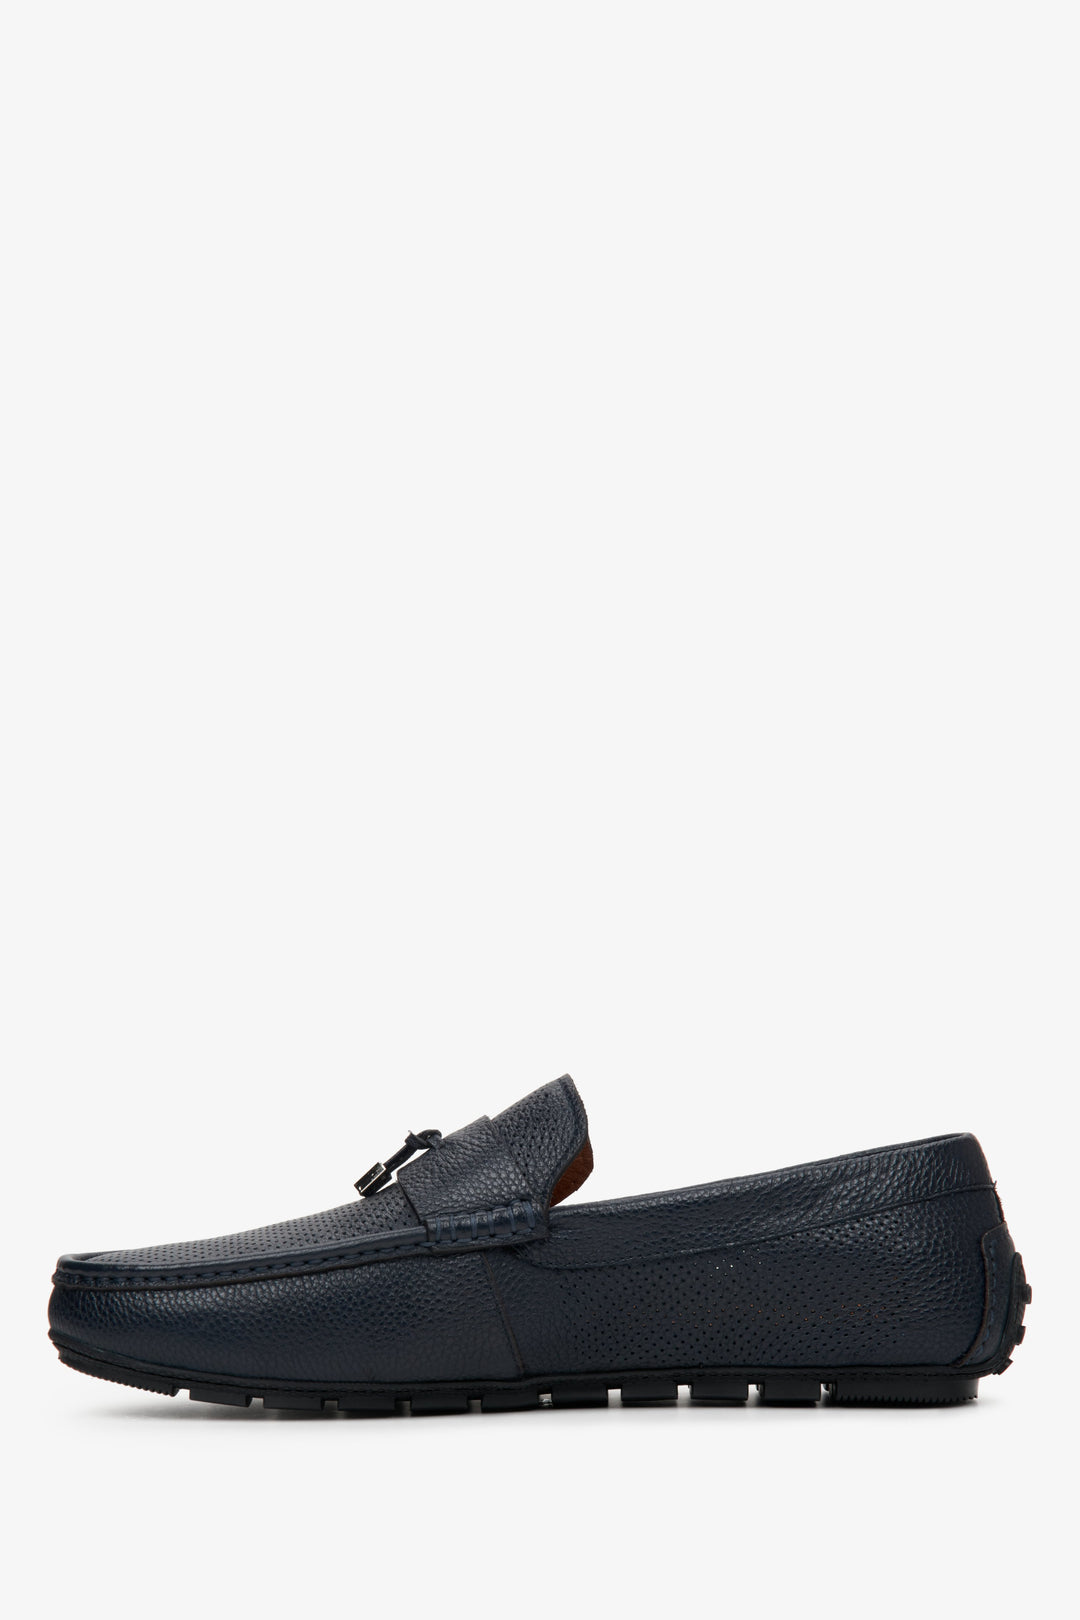 Navy blue leather men's loafers by Estro for fall - shoe profile.